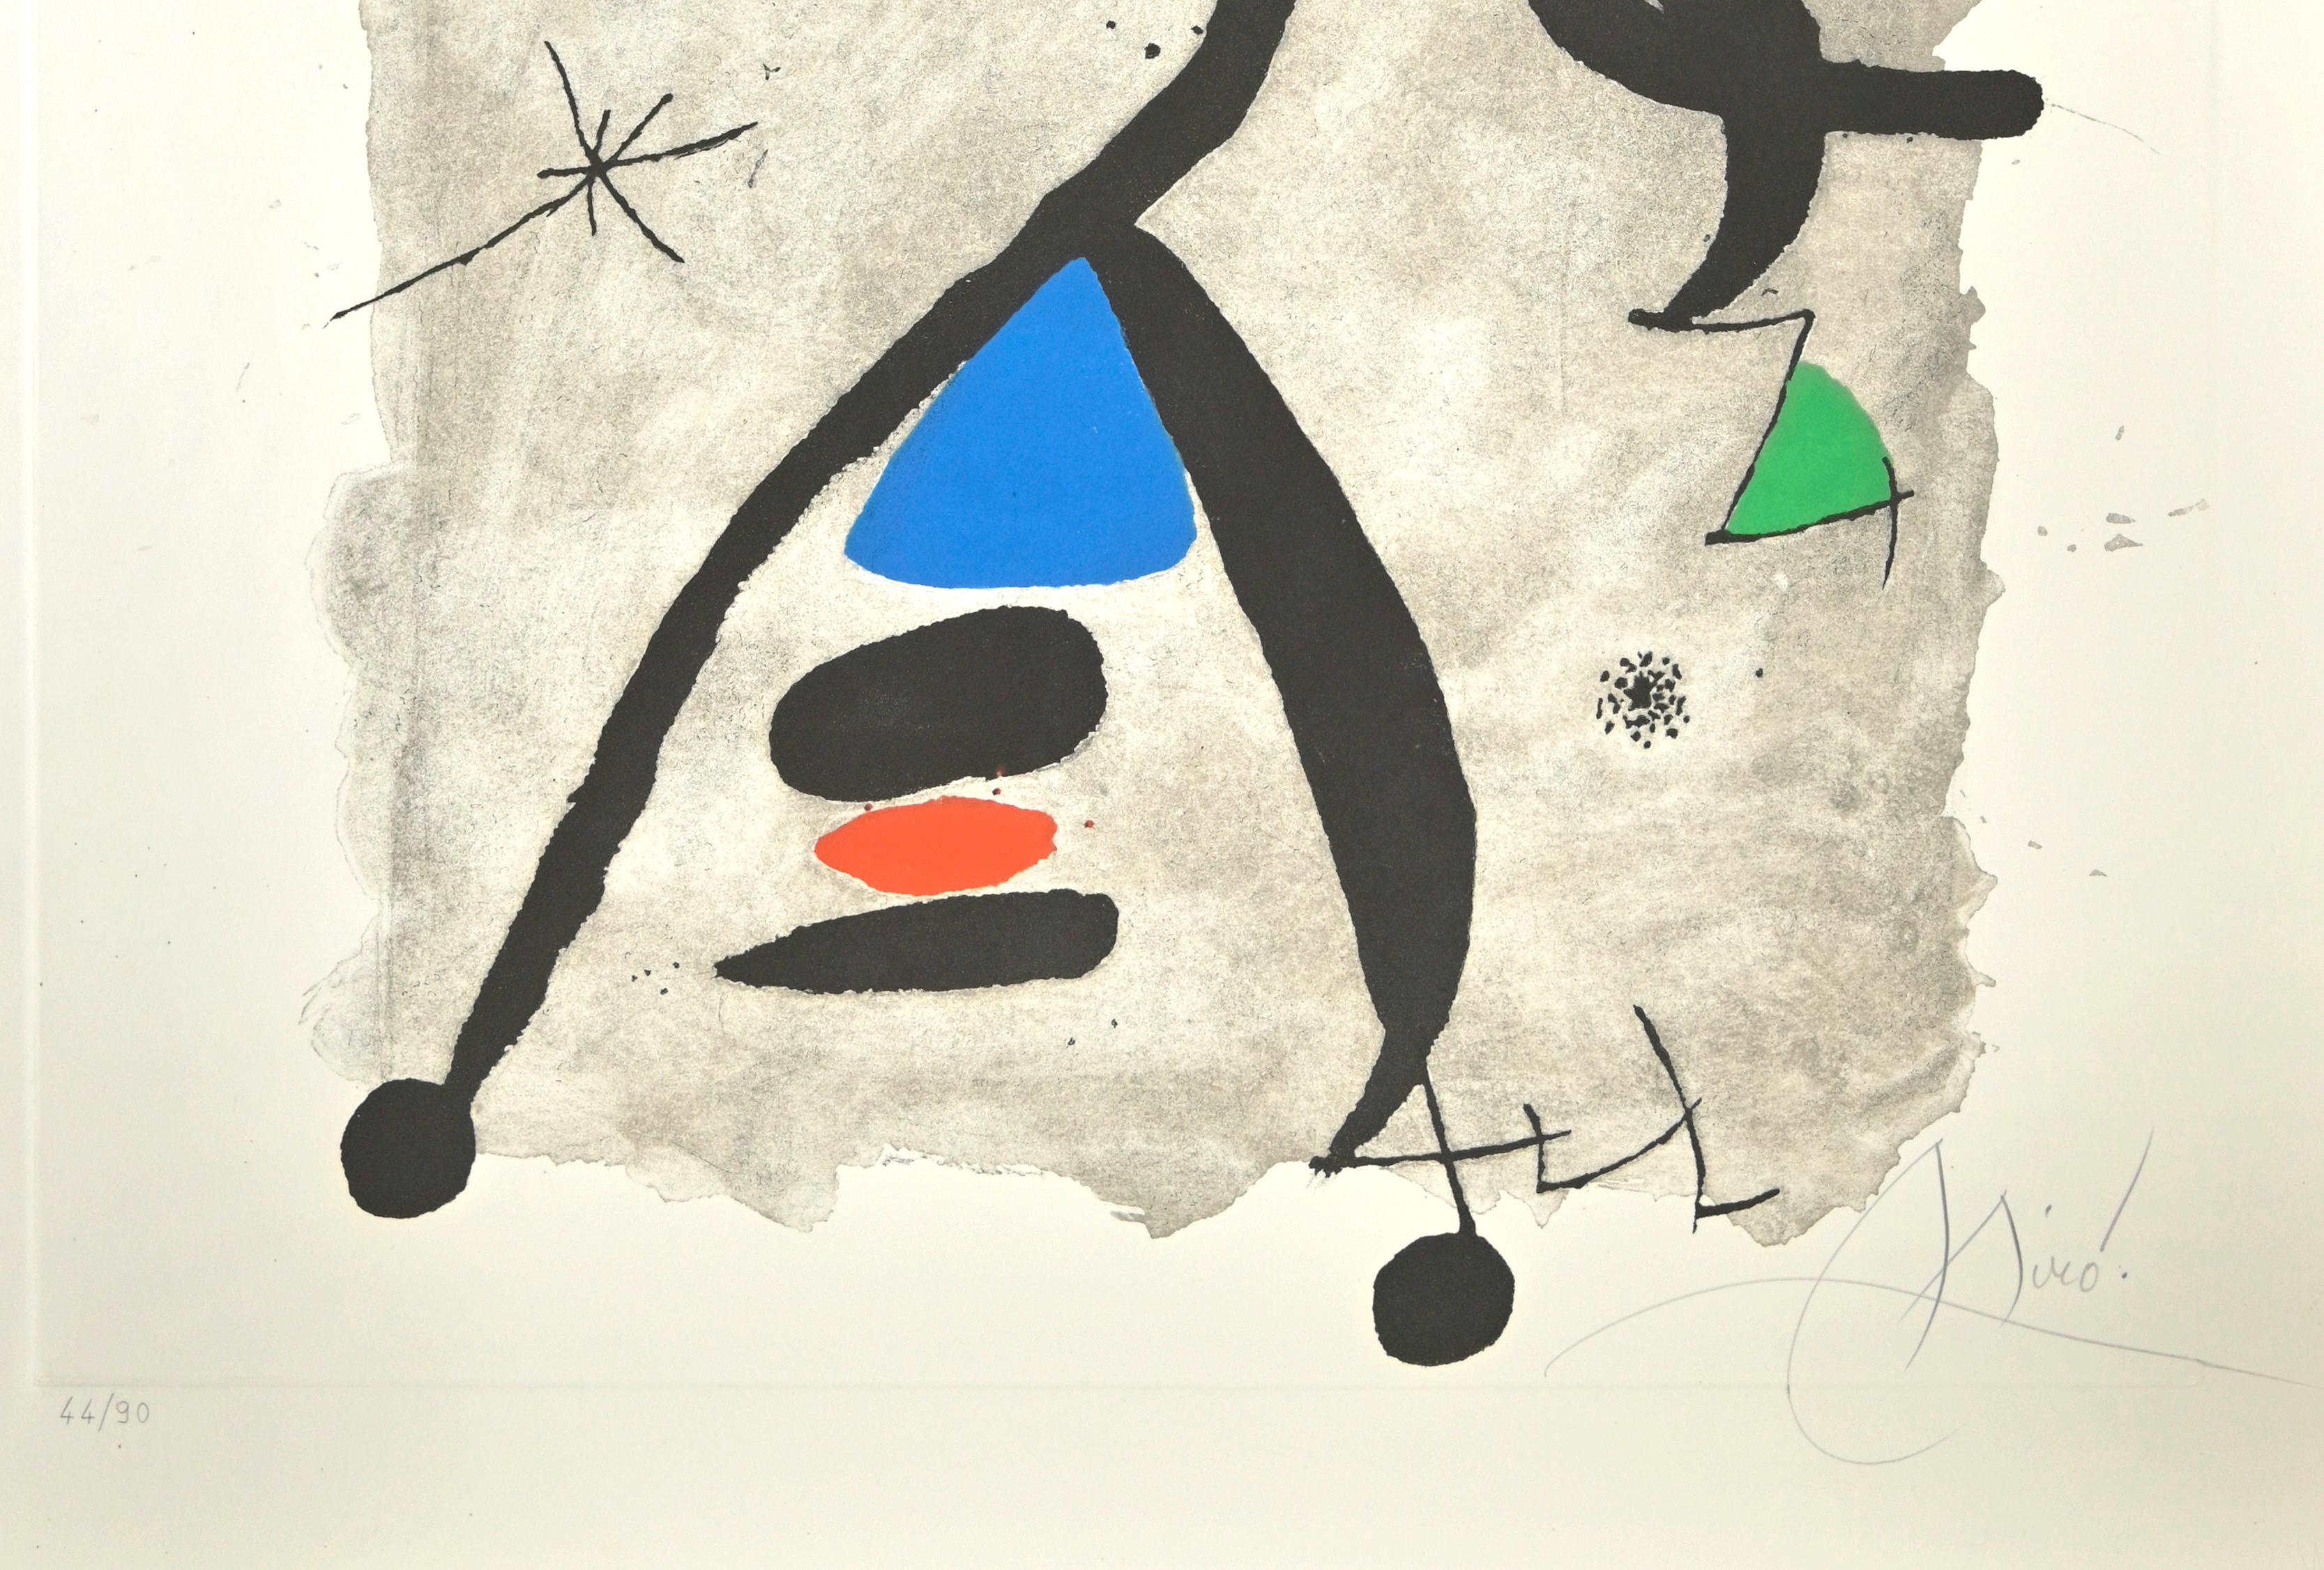 For Alberti, For Spain! - Etching by Joan Mirò - 1975 - Surrealist Print by Joan Miró